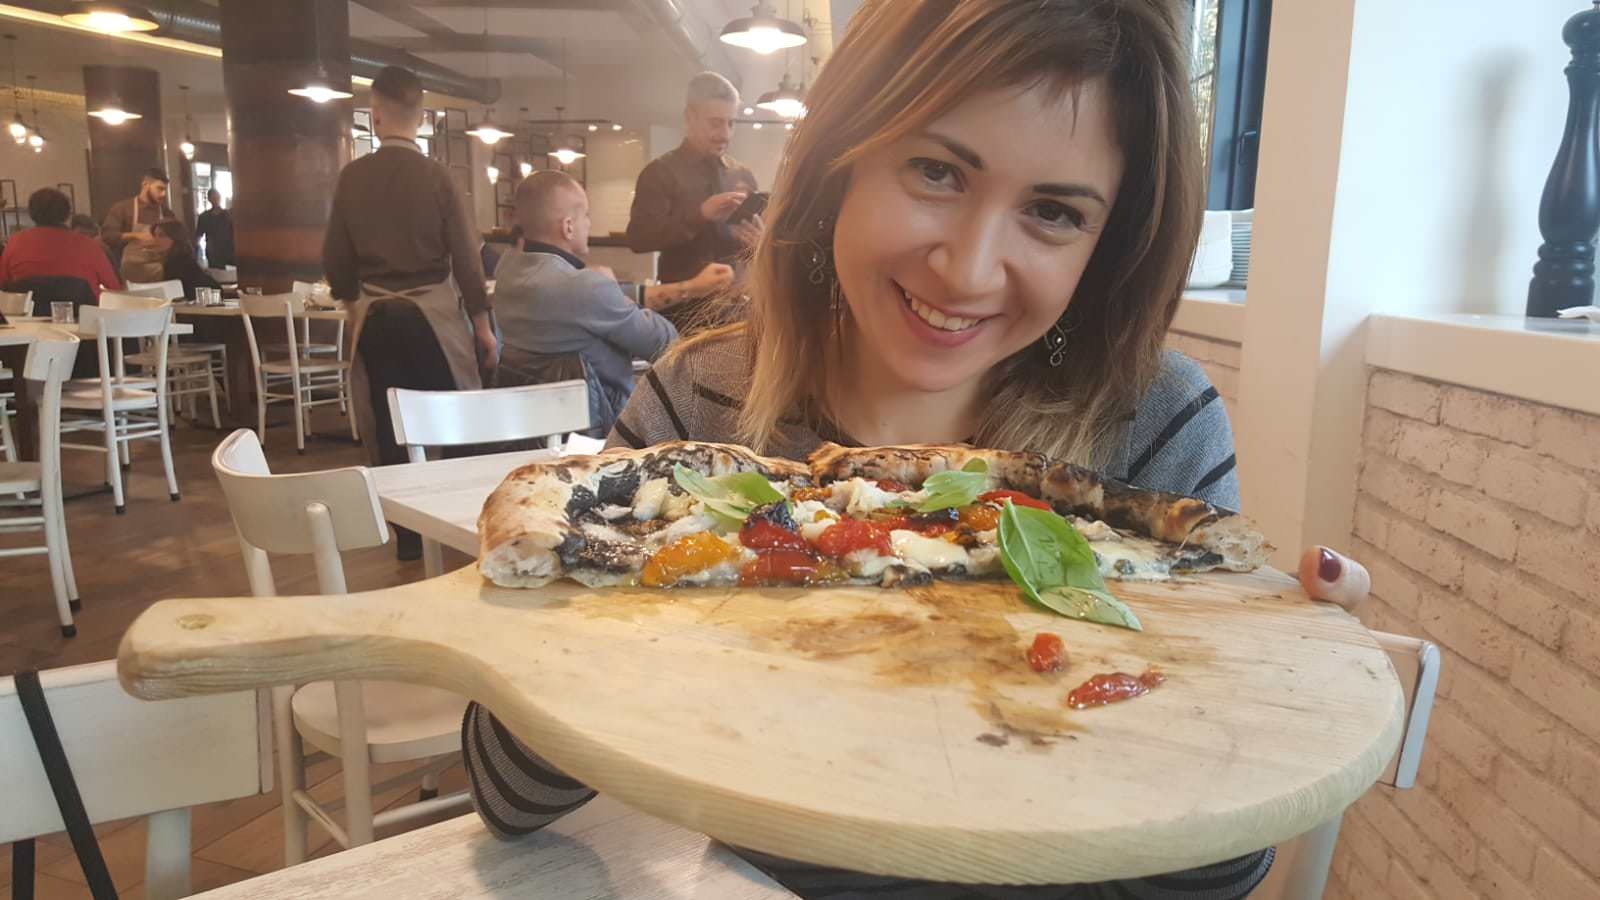 A woman is holding a wooden board towards the camera with a half eaten pizza on it and smiling